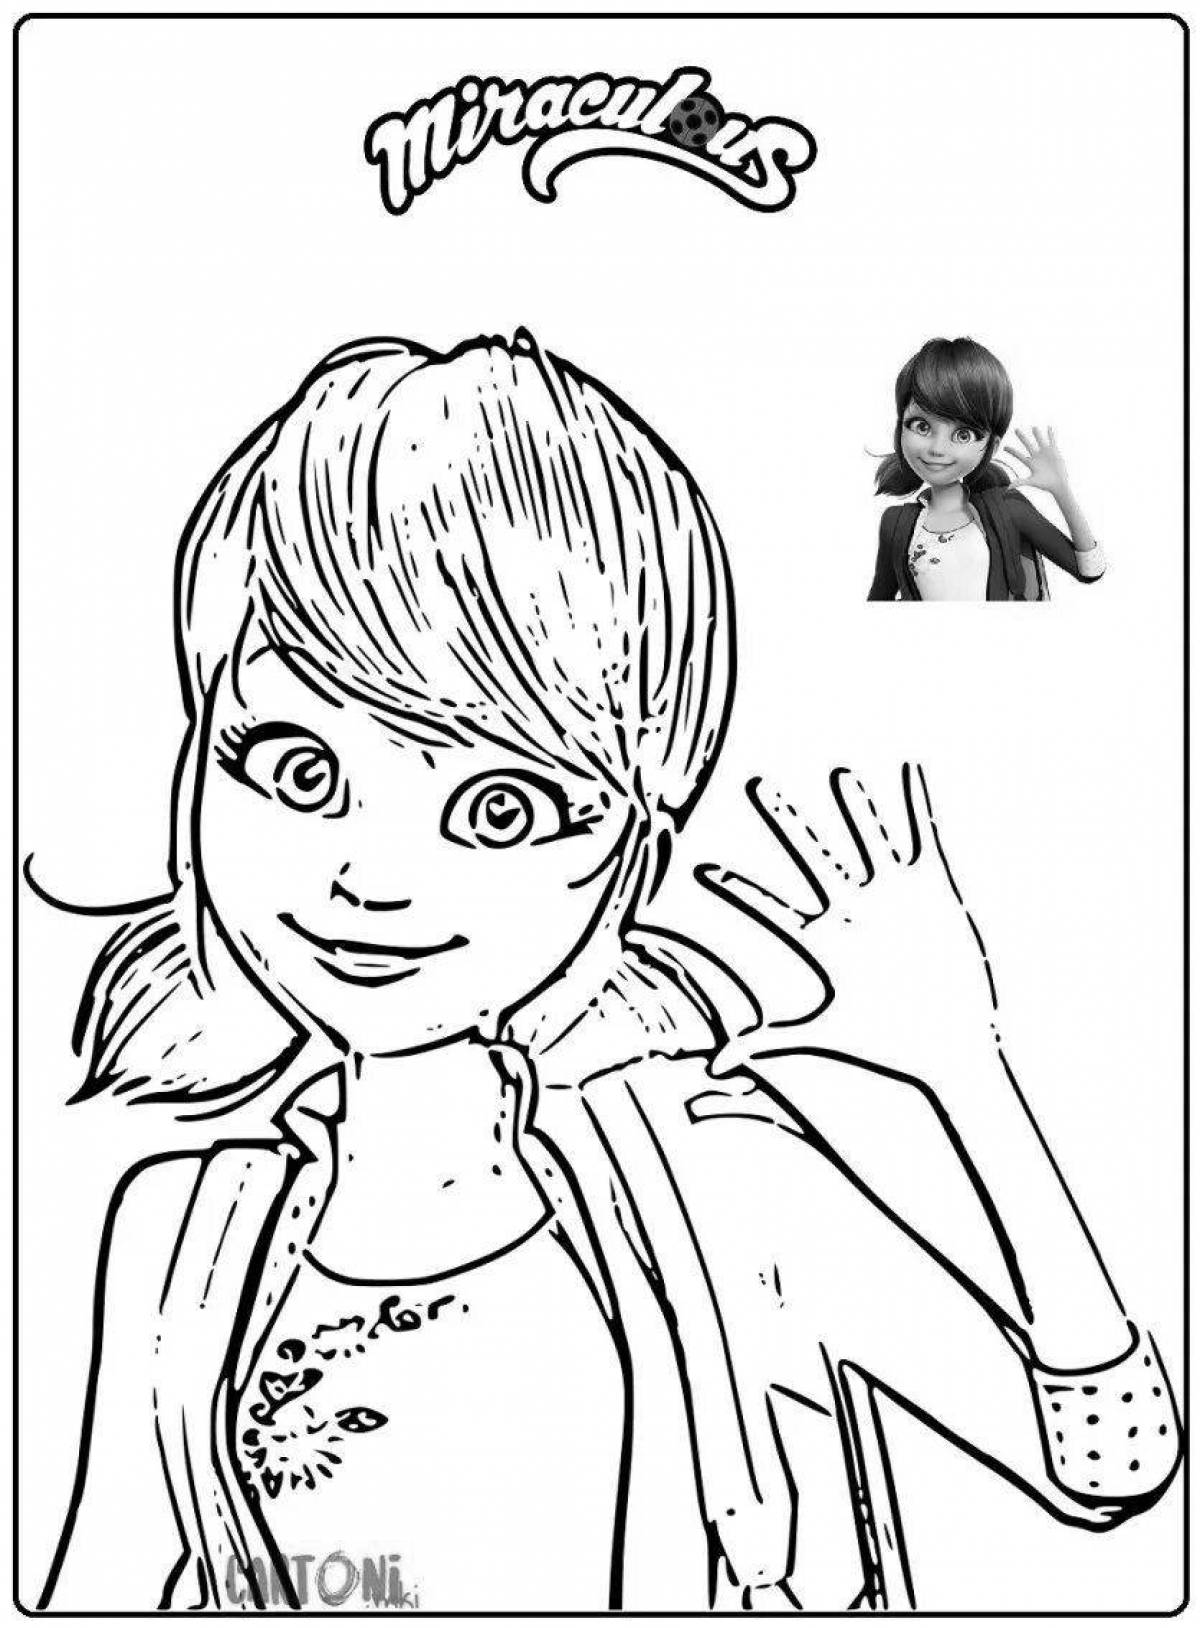 Marinette's fabulous coloring page for students